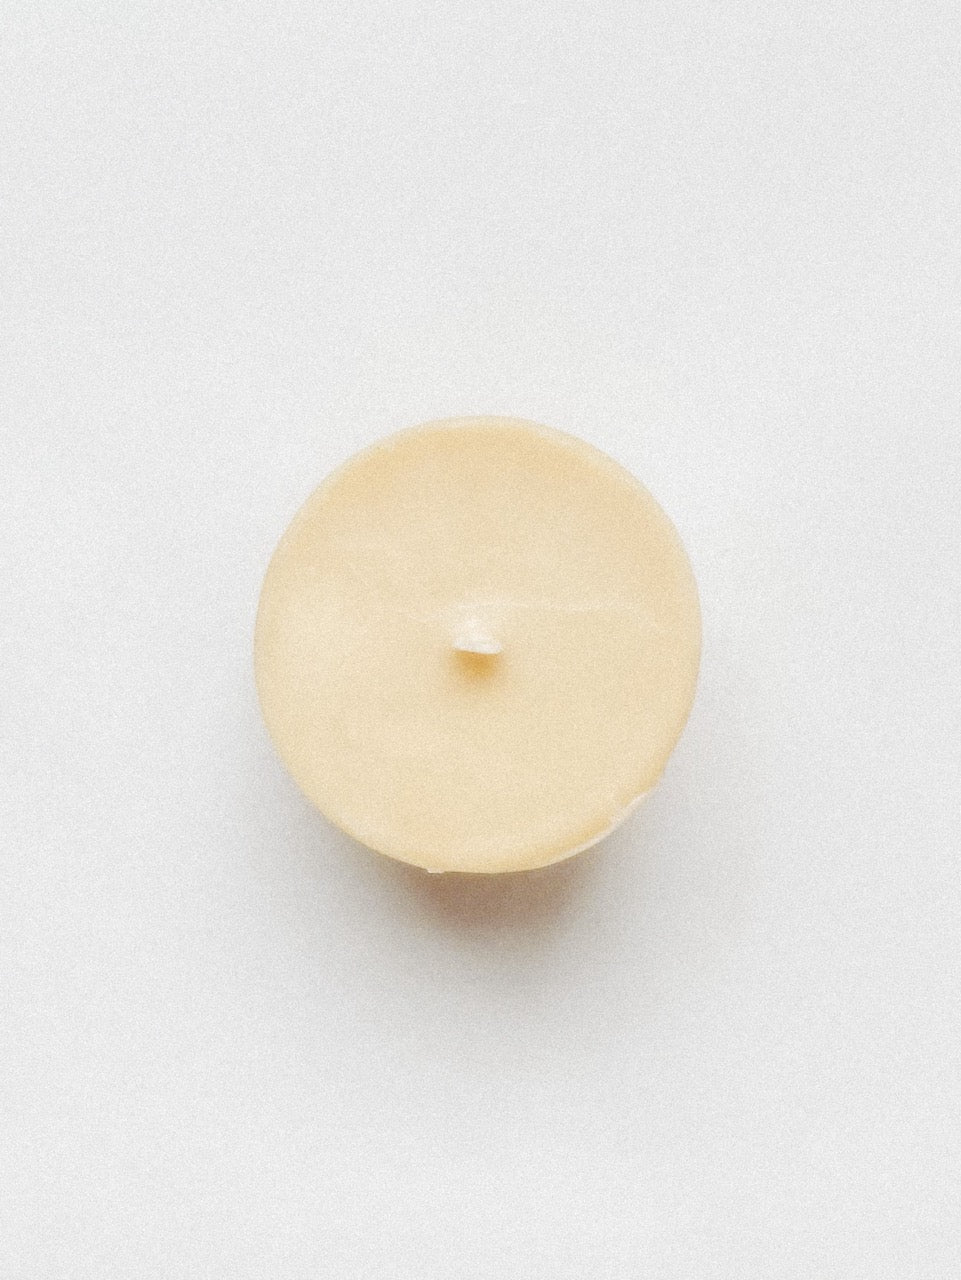 scented beeswax candle refill image wax refill